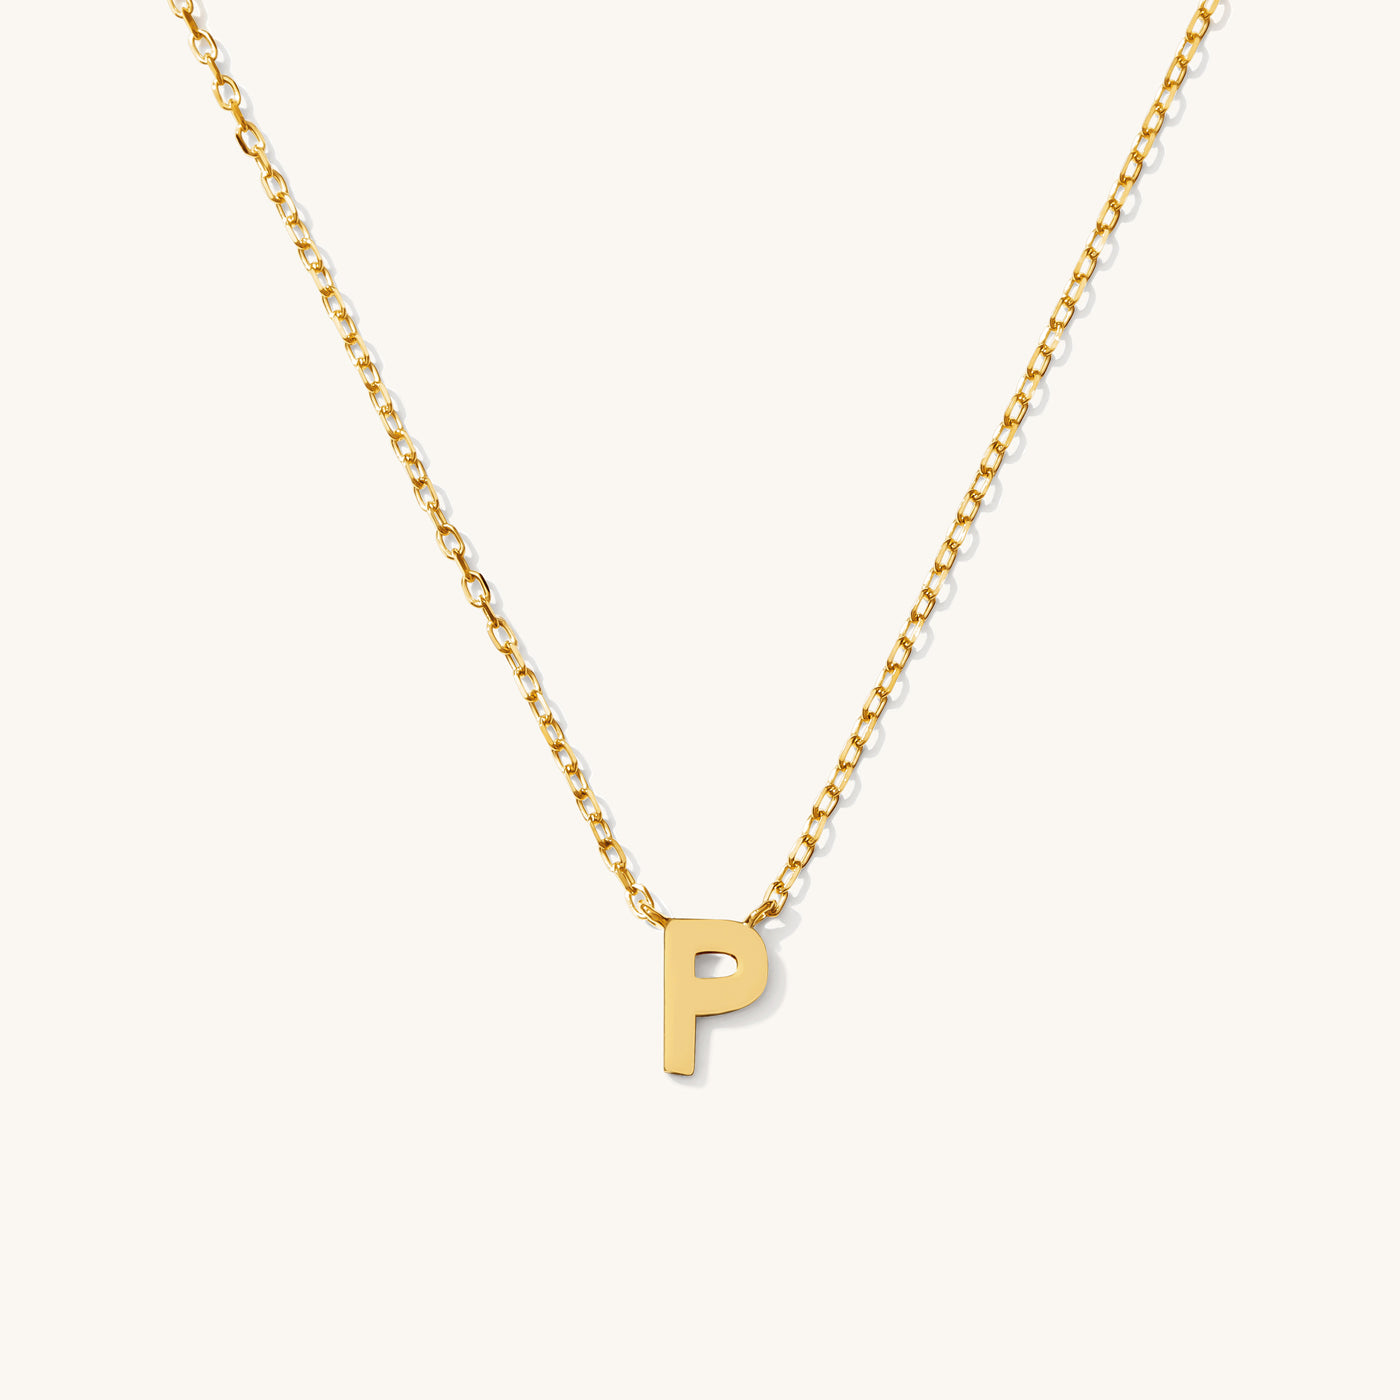 P Tiny Initial Necklace - 14k Solid Gold